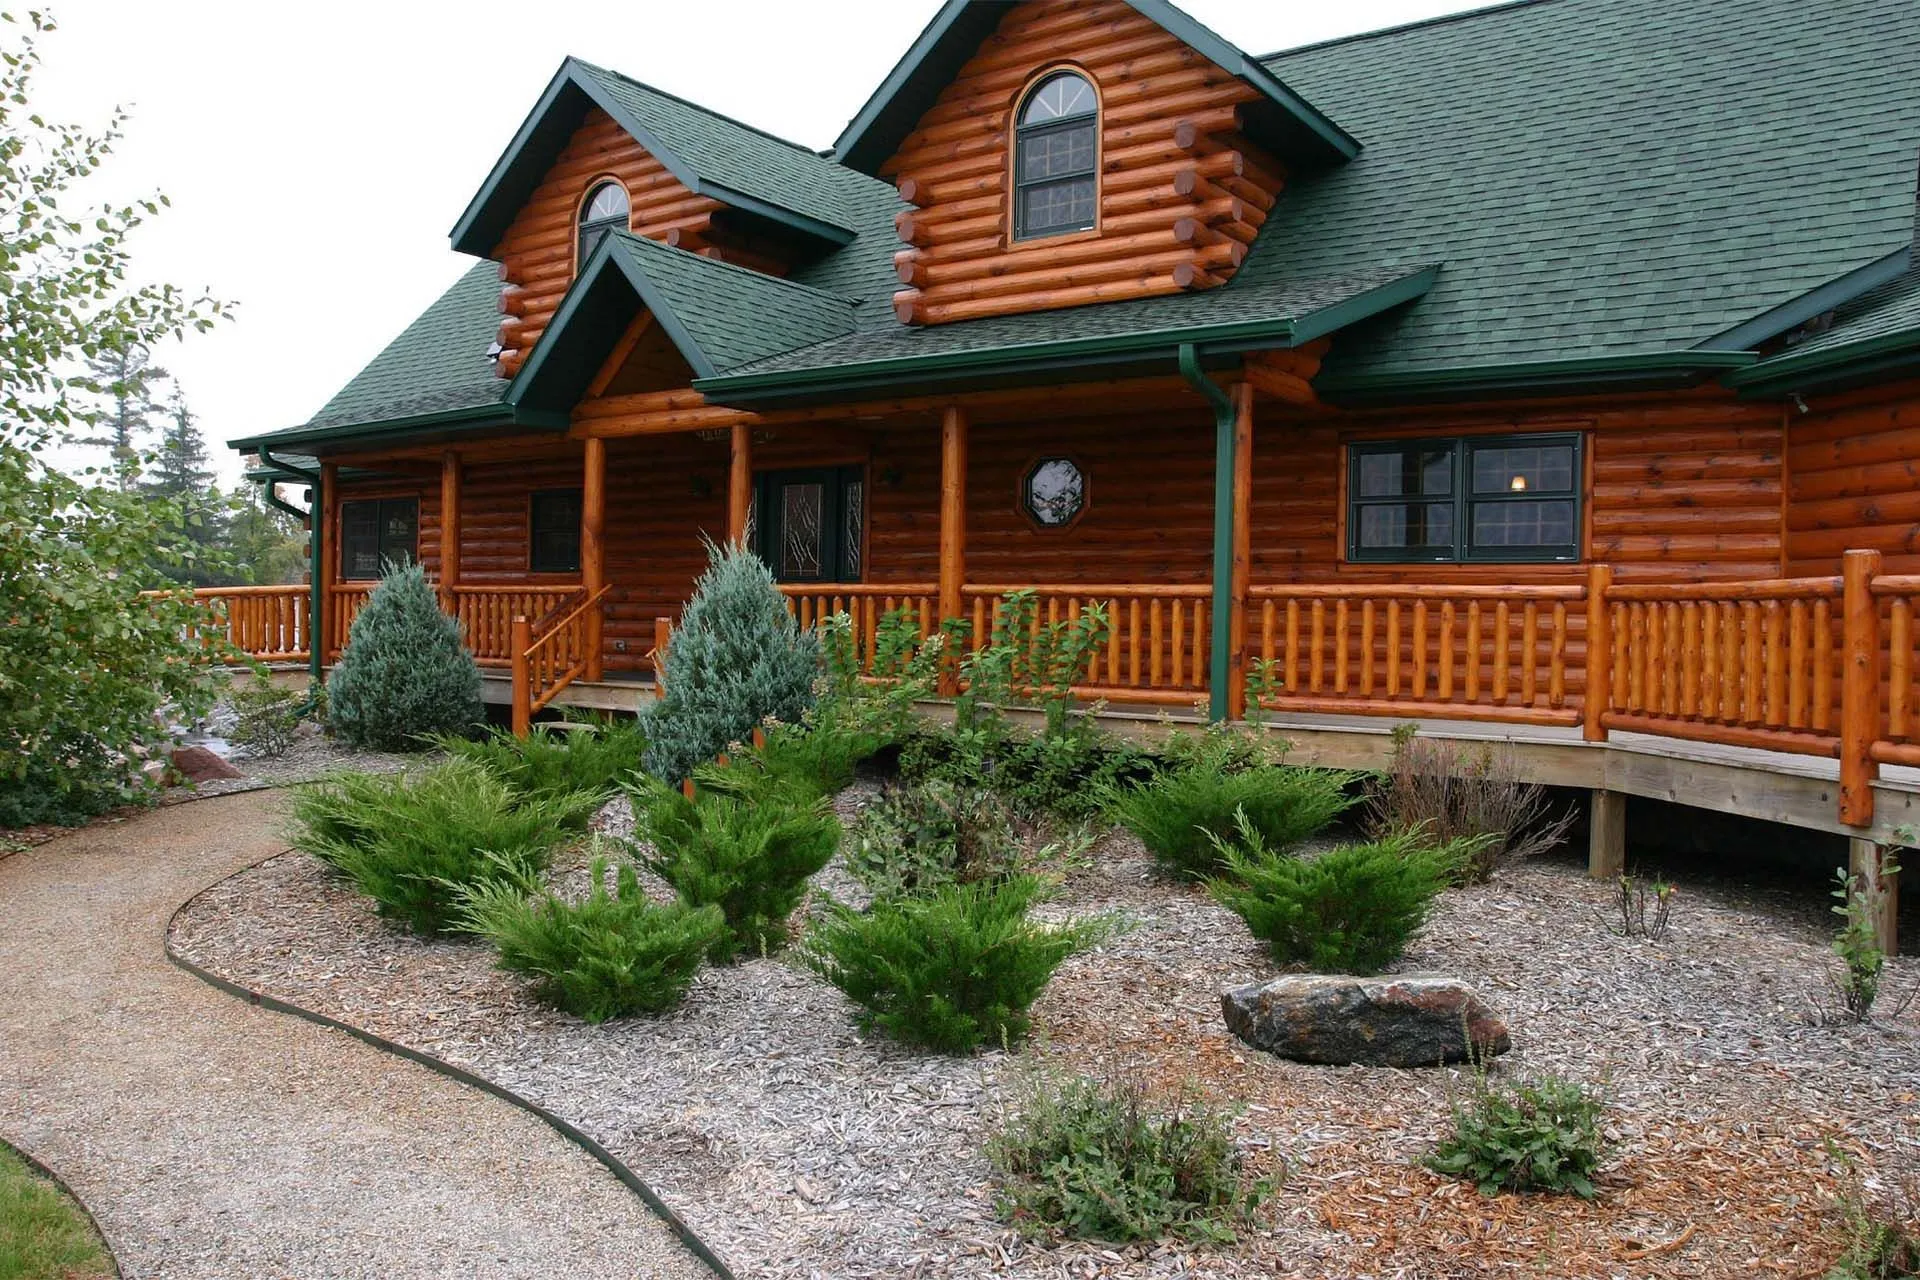 An image of a log house, a backyard with several plants and a walkway